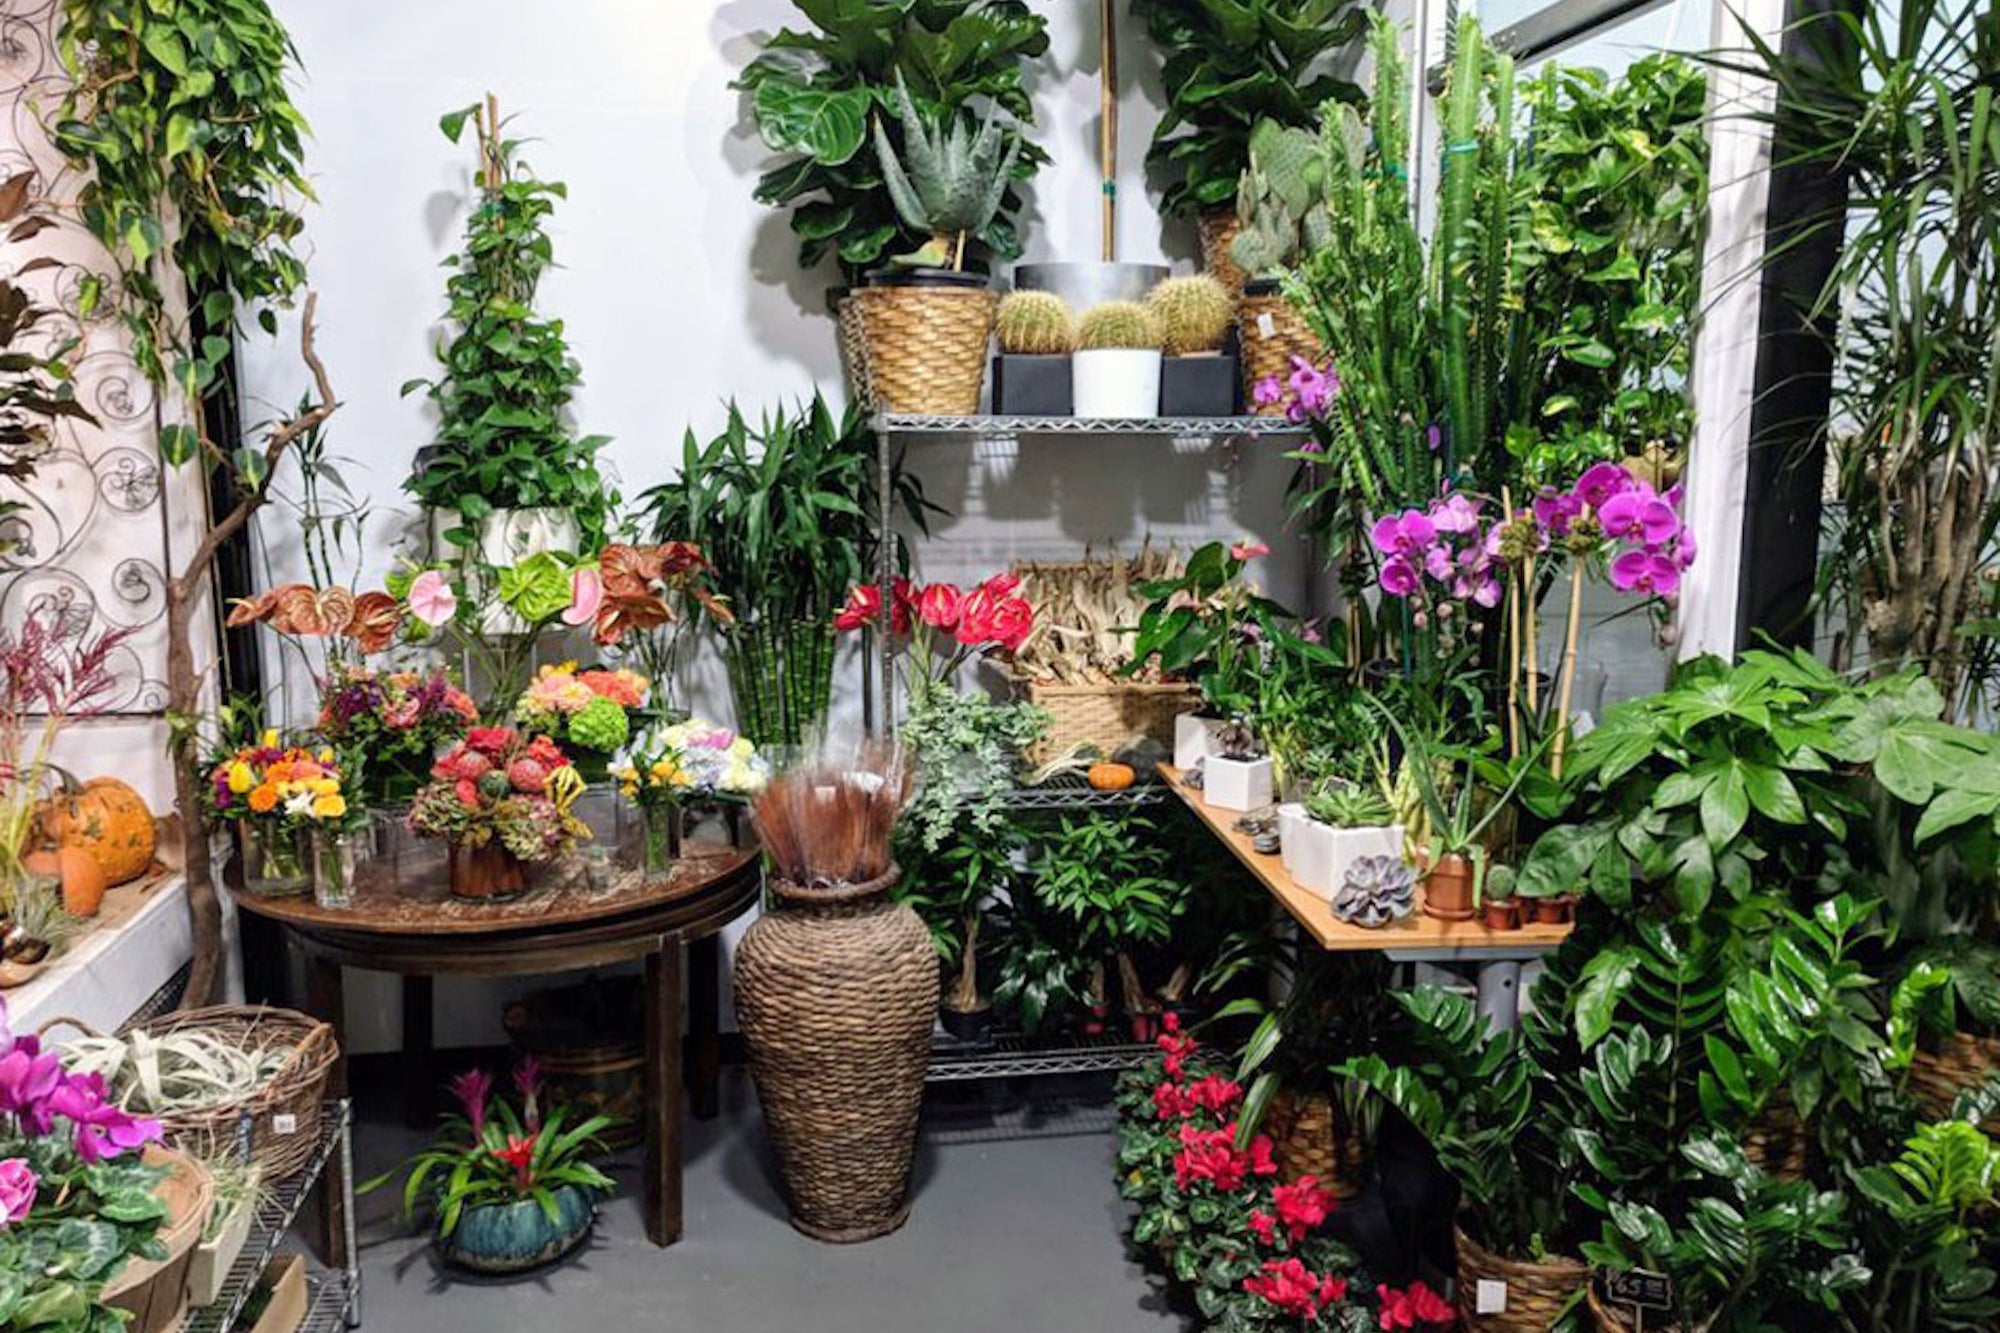 How An Above-and-Beyond Floral Experience Led to a Lifetime Customer